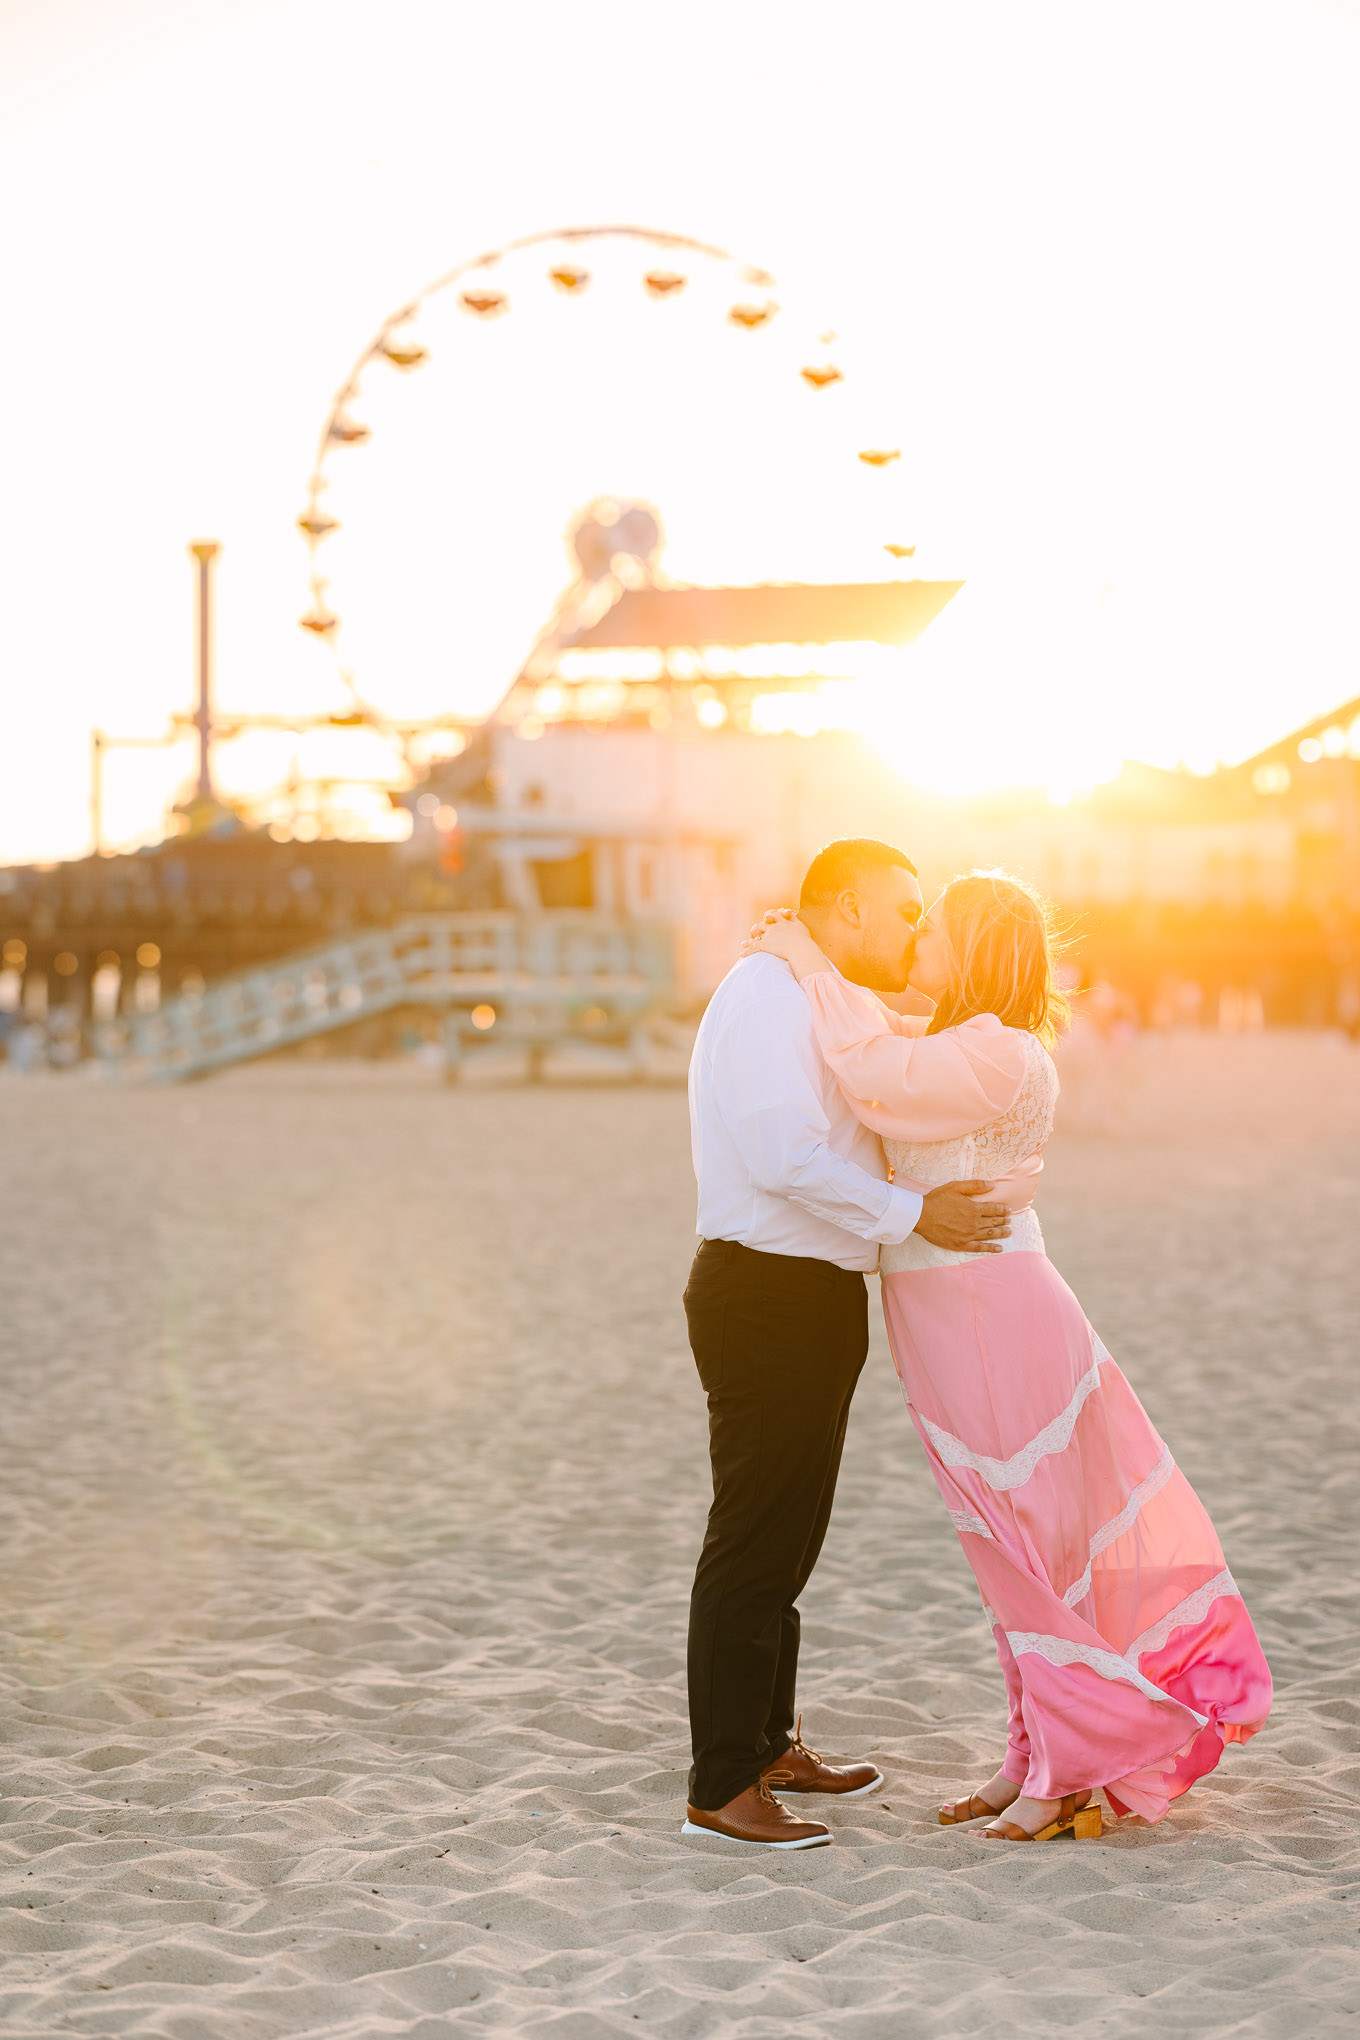 Santa Monica Pier engagement session | Wedding and elopement photography roundup | Los Angeles and Palm Springs photographer | #losangeleswedding #palmspringswedding #elopementphotographer Source: Mary Costa Photography | Los Angeles